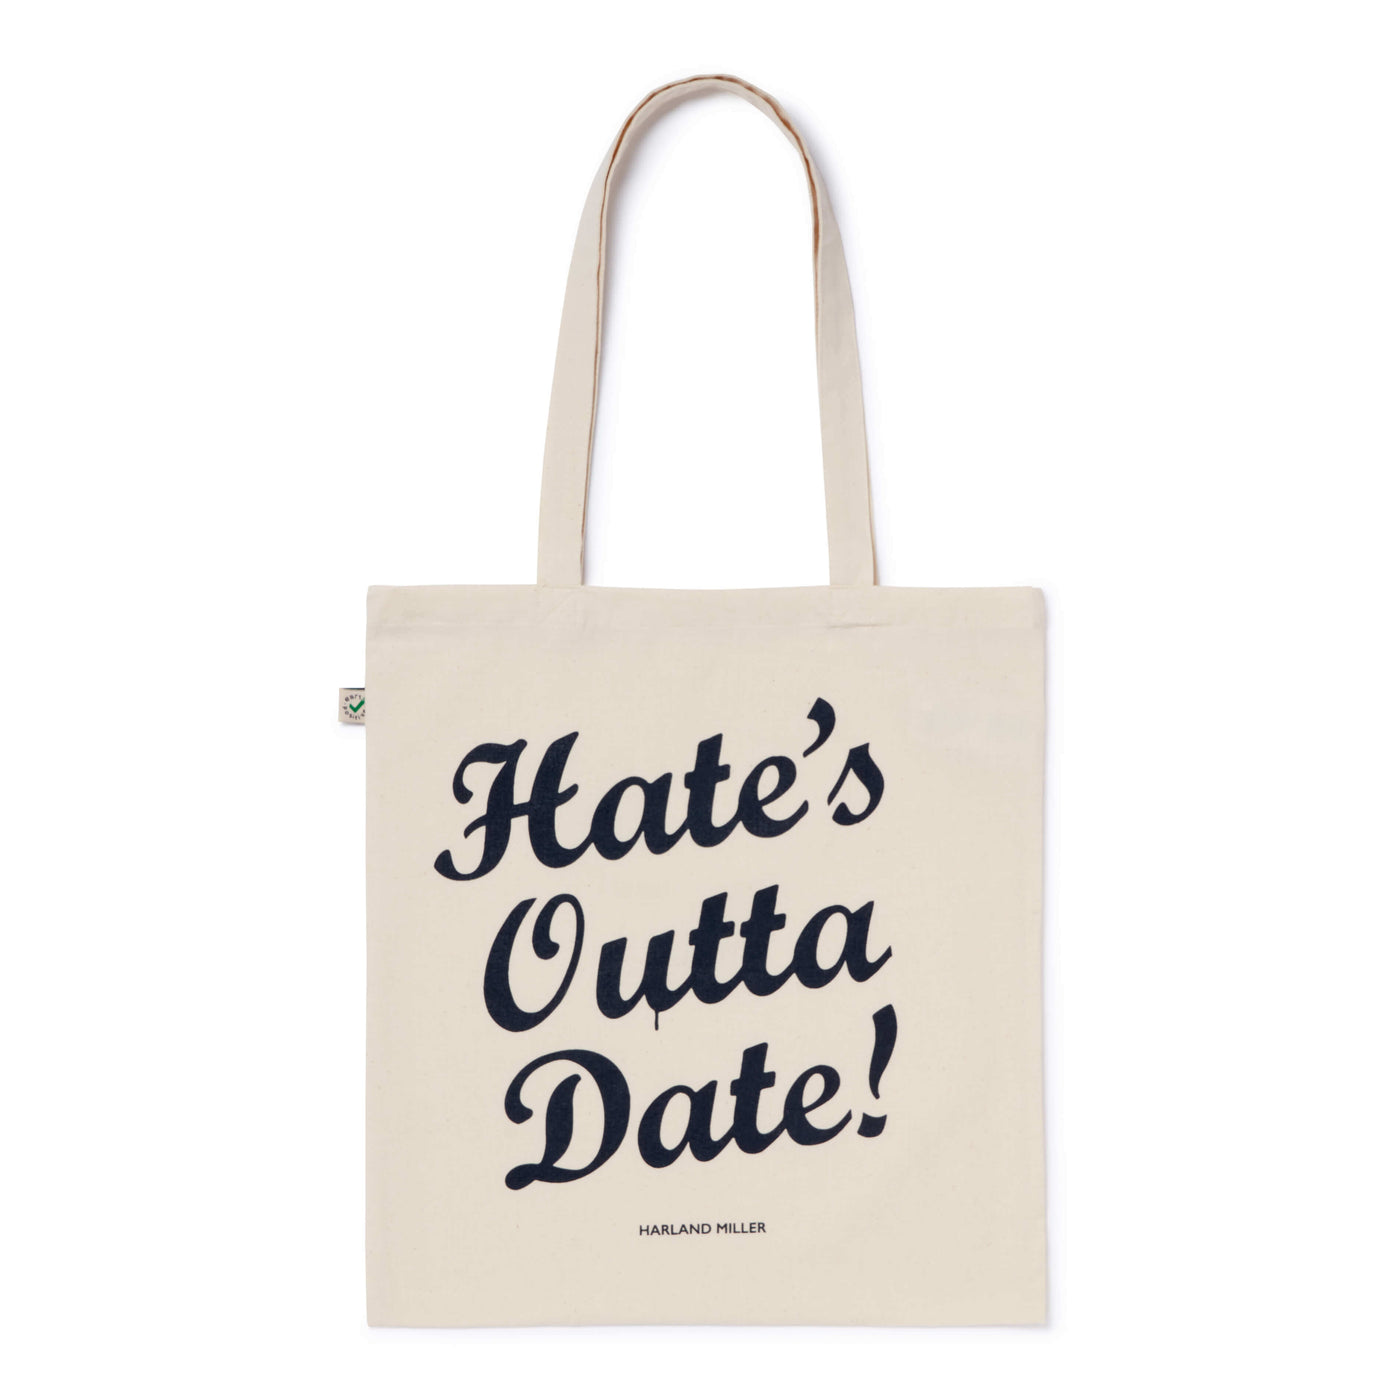 Harland Miller "Hate's Outta Date" Tote Bag